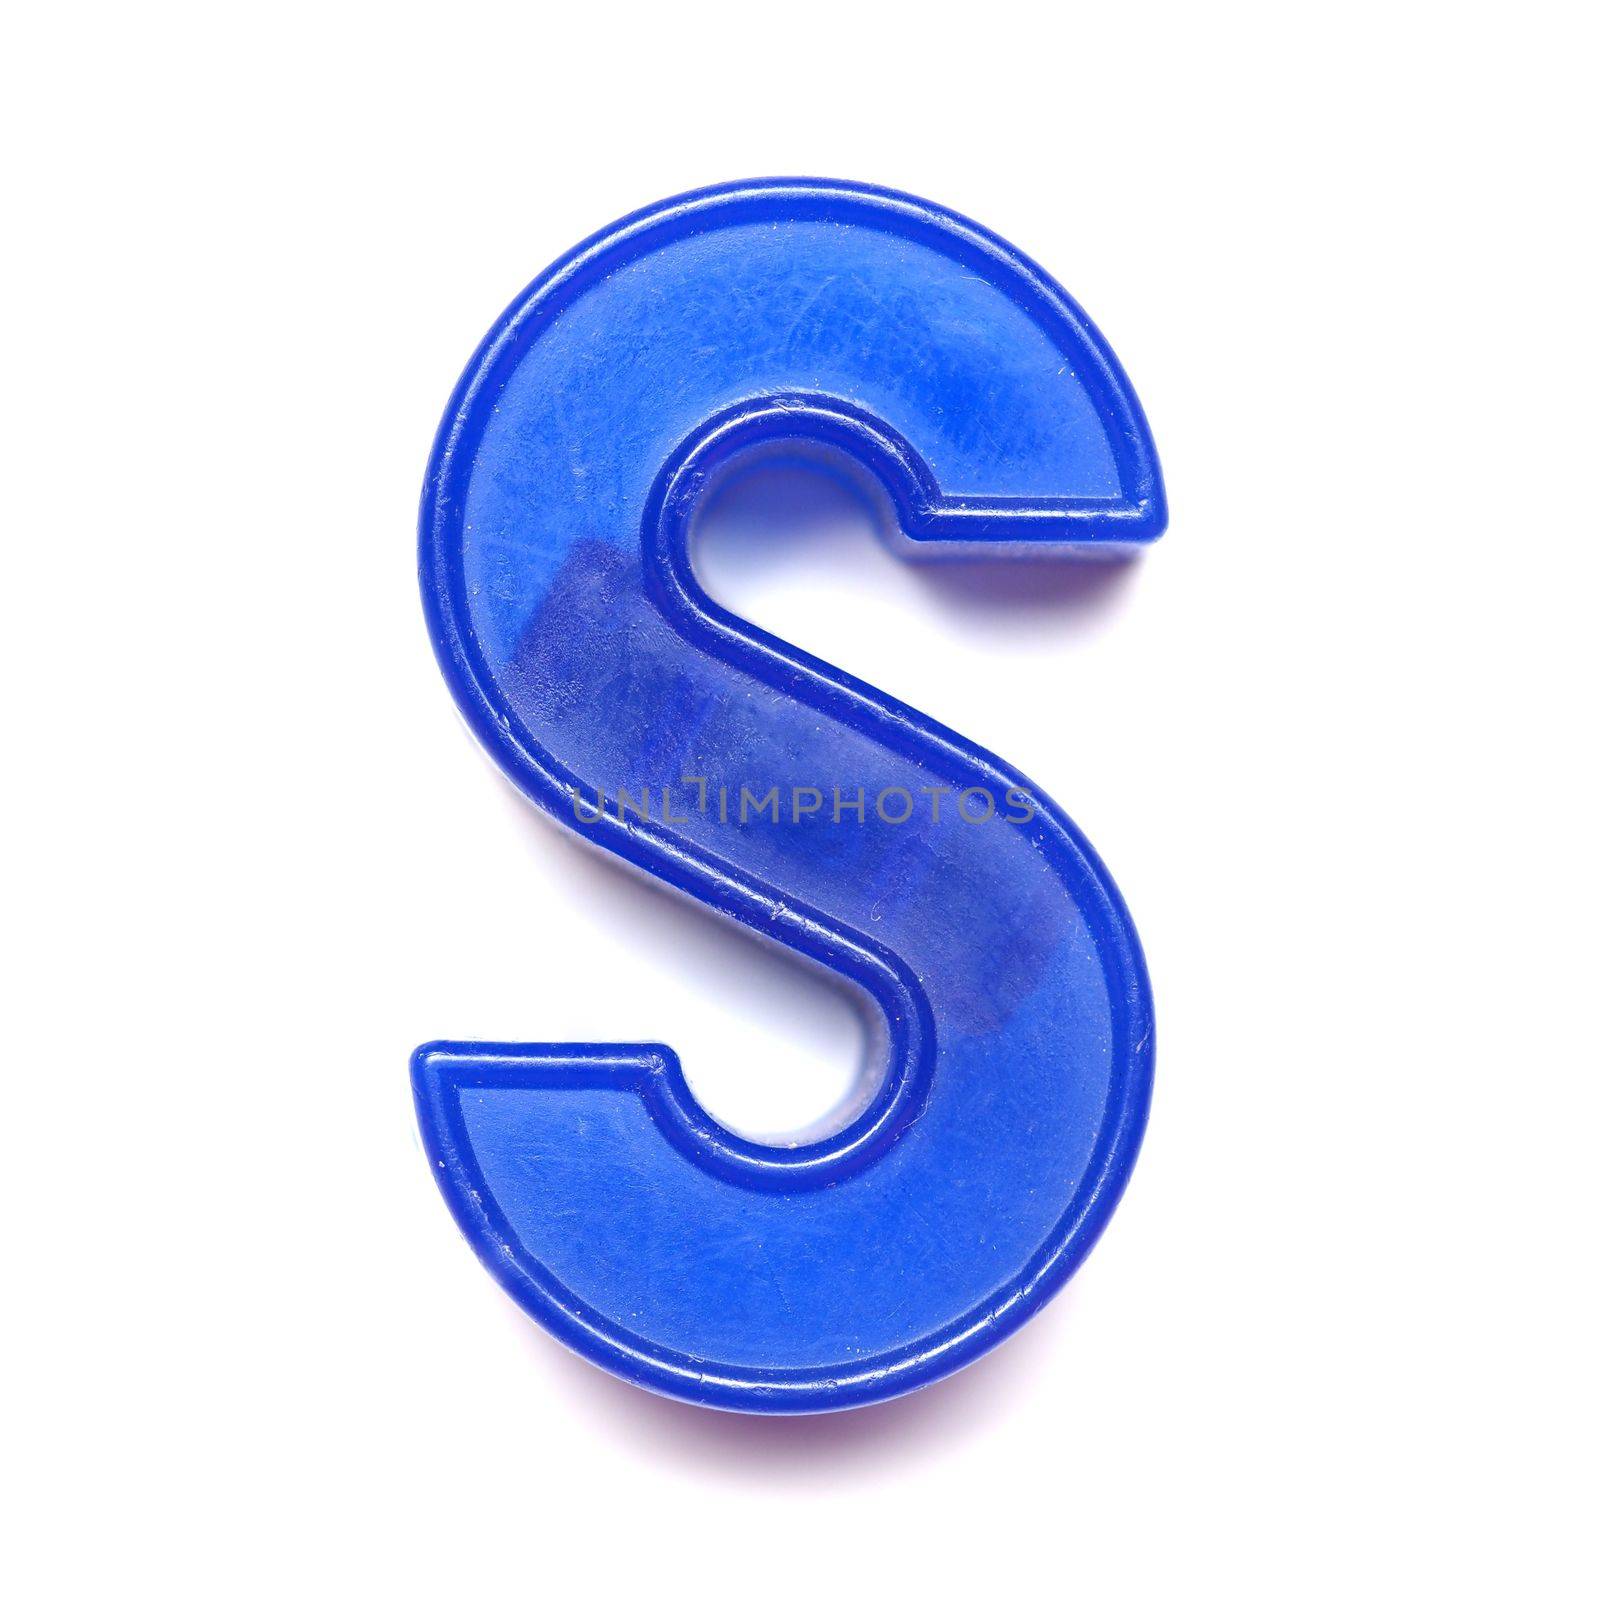 Magnetic uppercase letter S by claudiodivizia